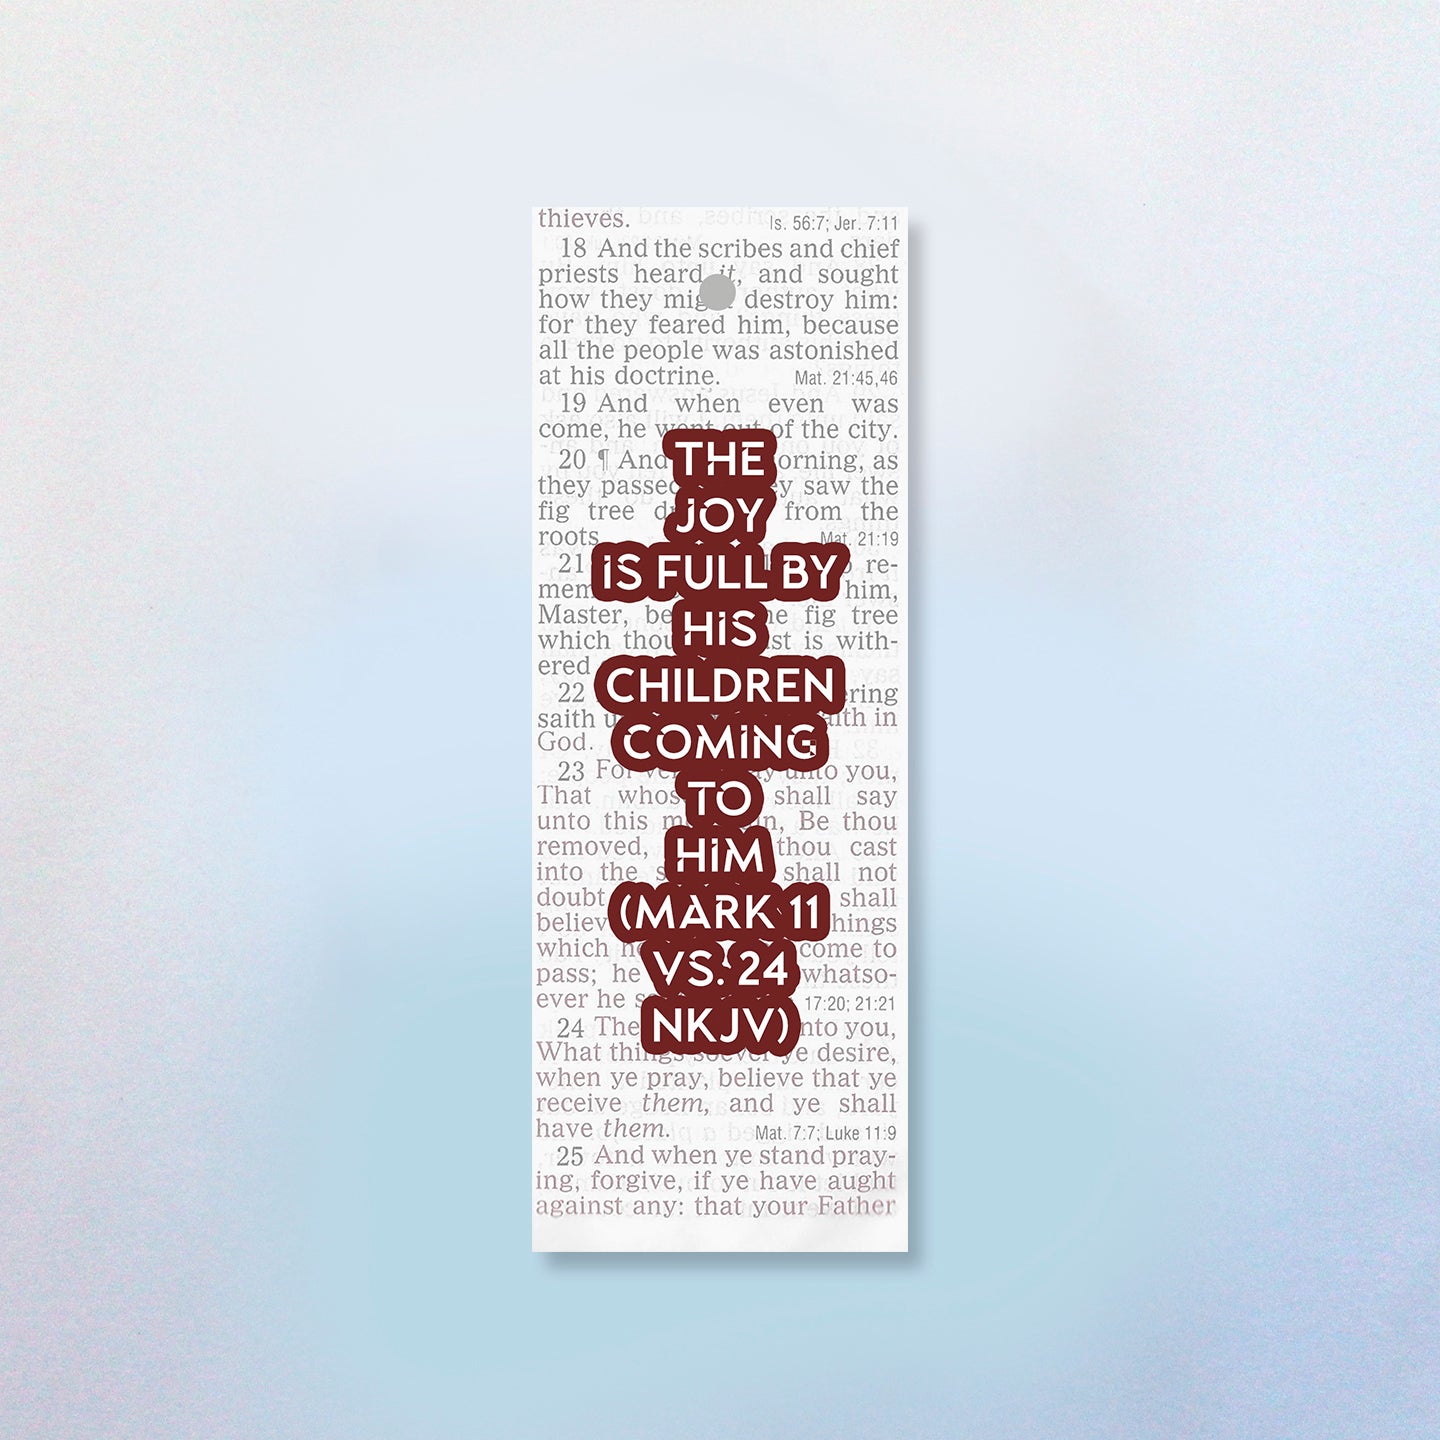 The Builder's Joy is Full by His Children Coming to Him (2 Styles) Bookmark